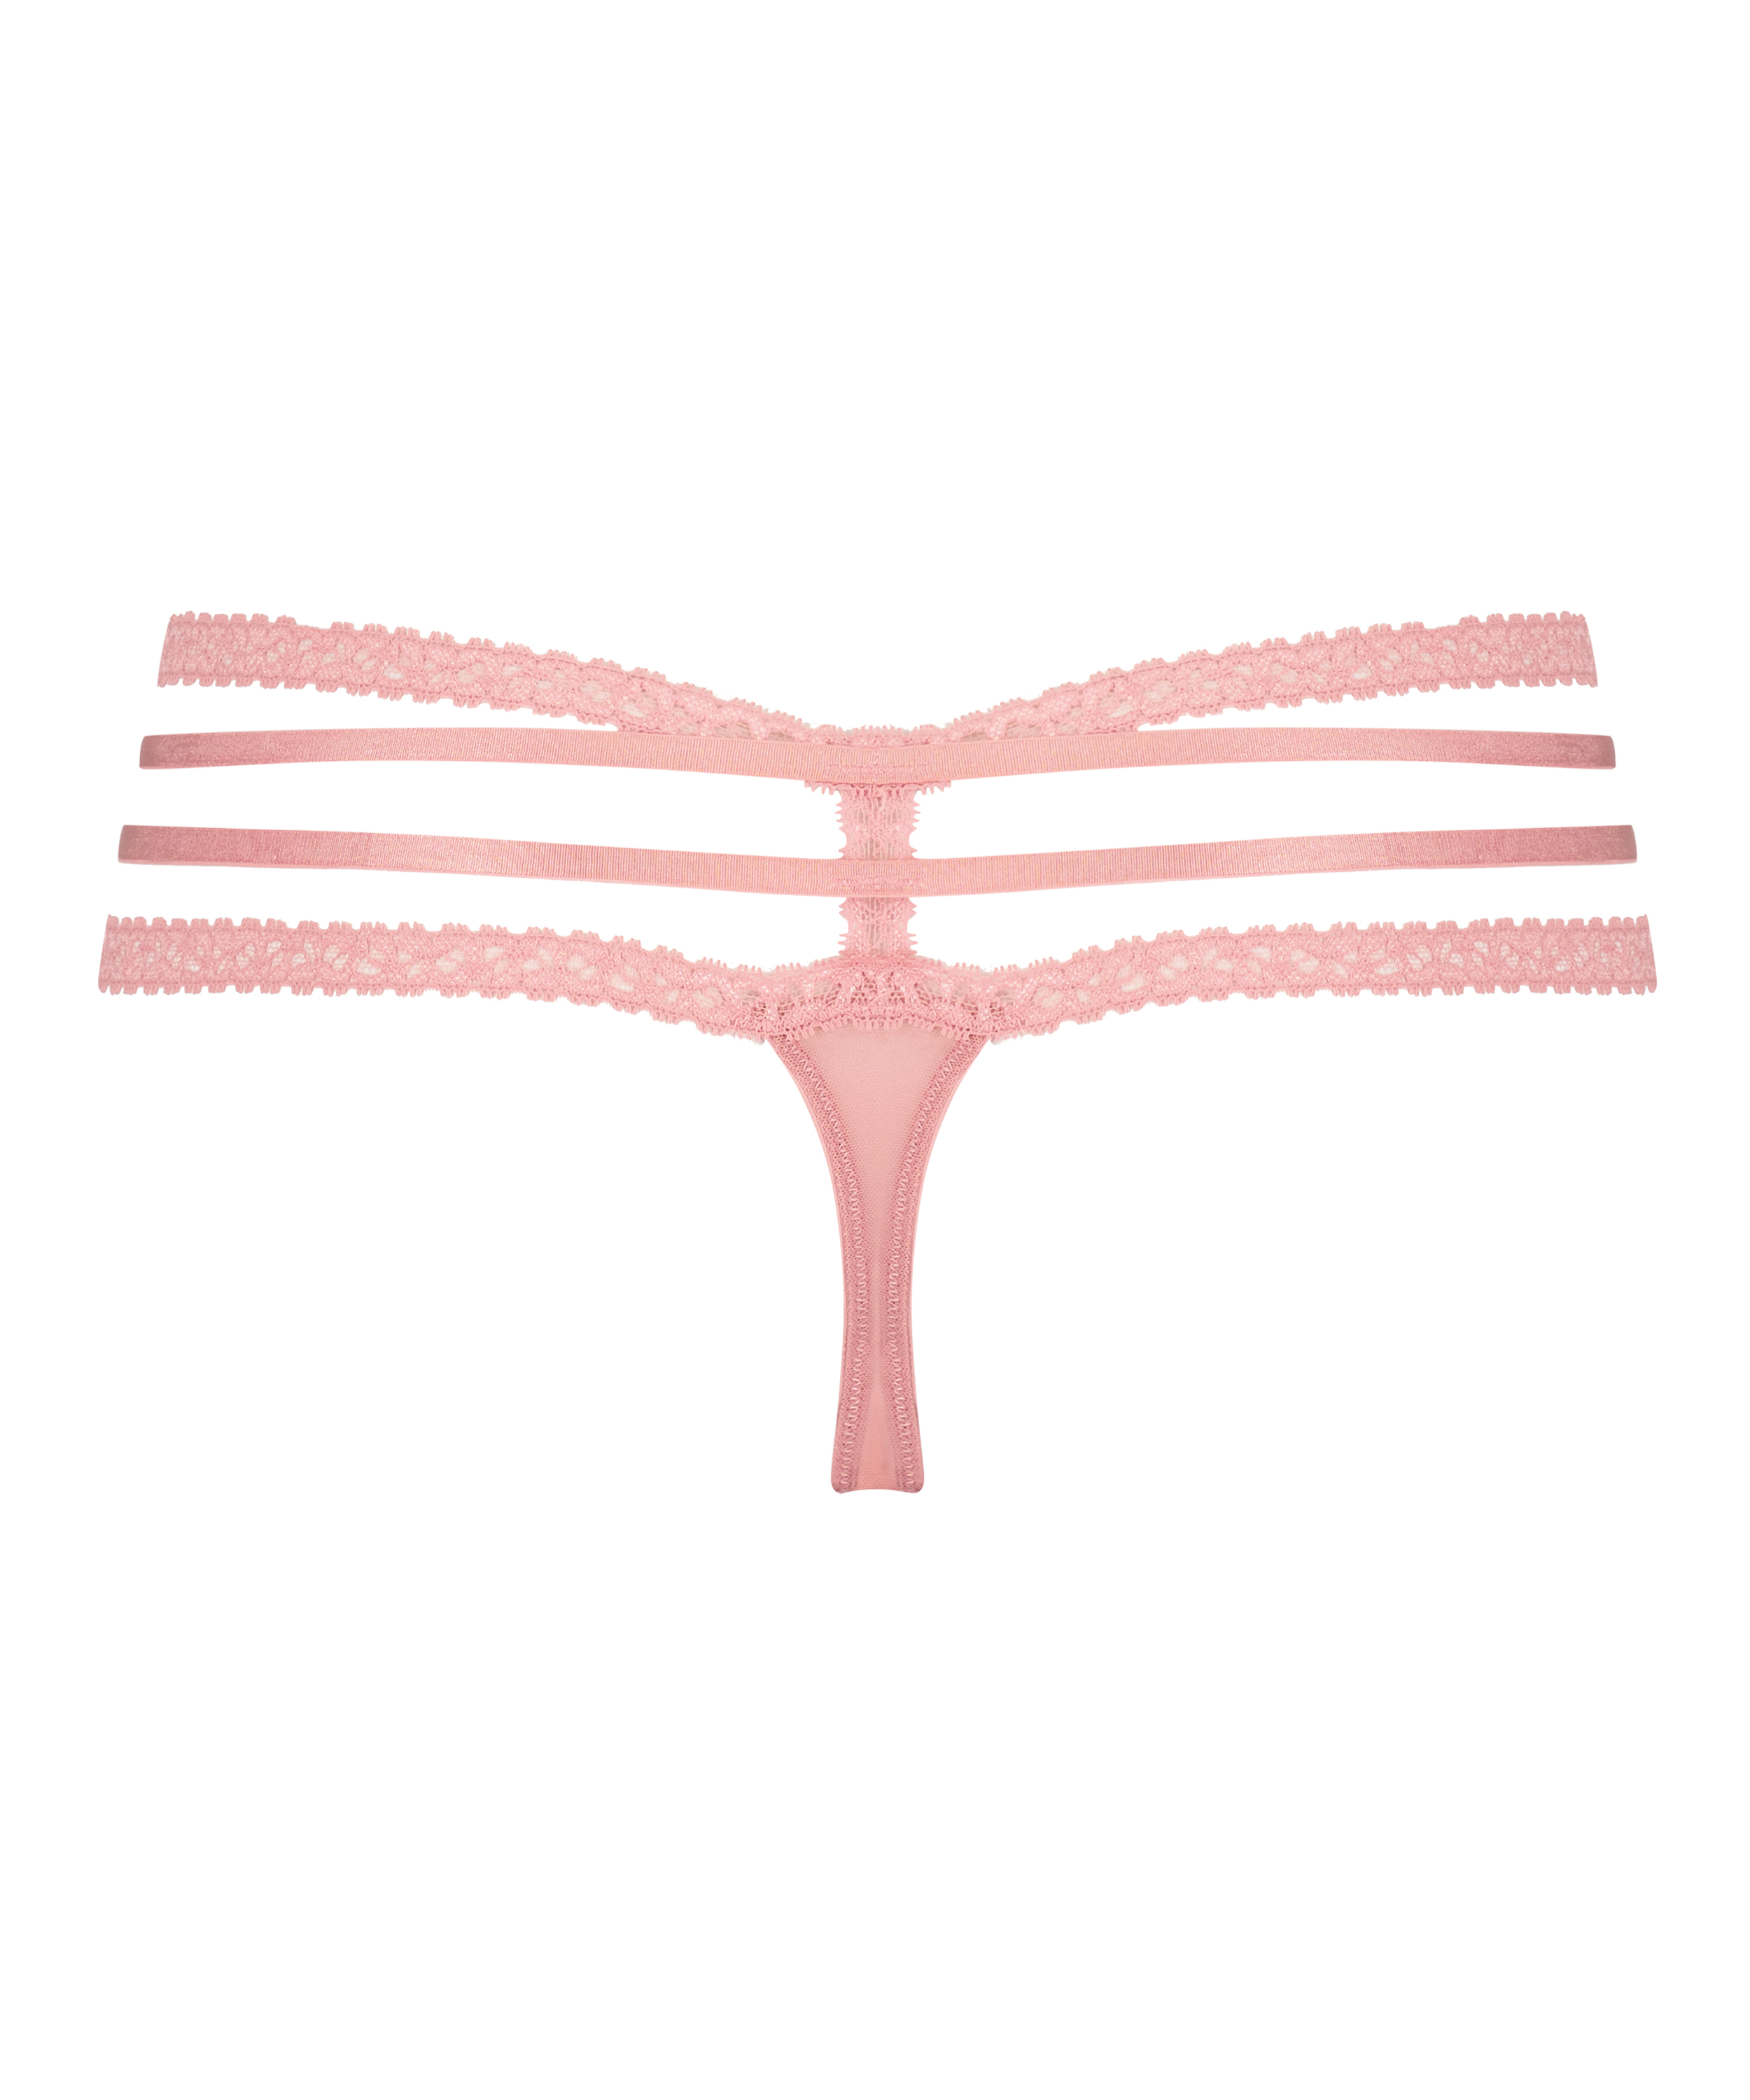 String taille extra basse Lorraine, Rose, main